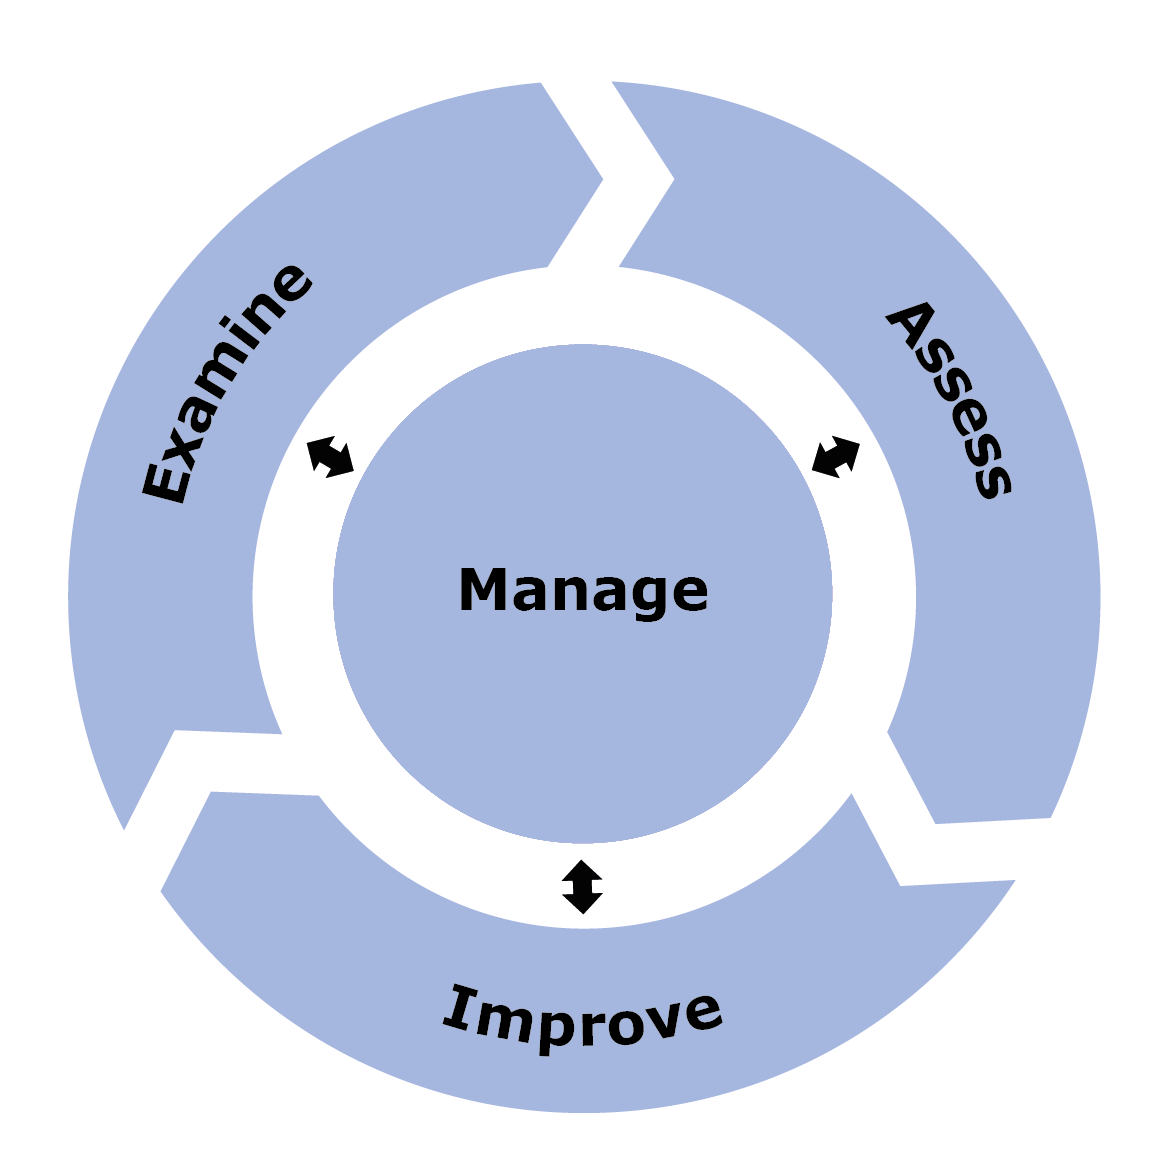 The SSA process consists of the Examine, Assess and Improve phases, guided and informed by Manage